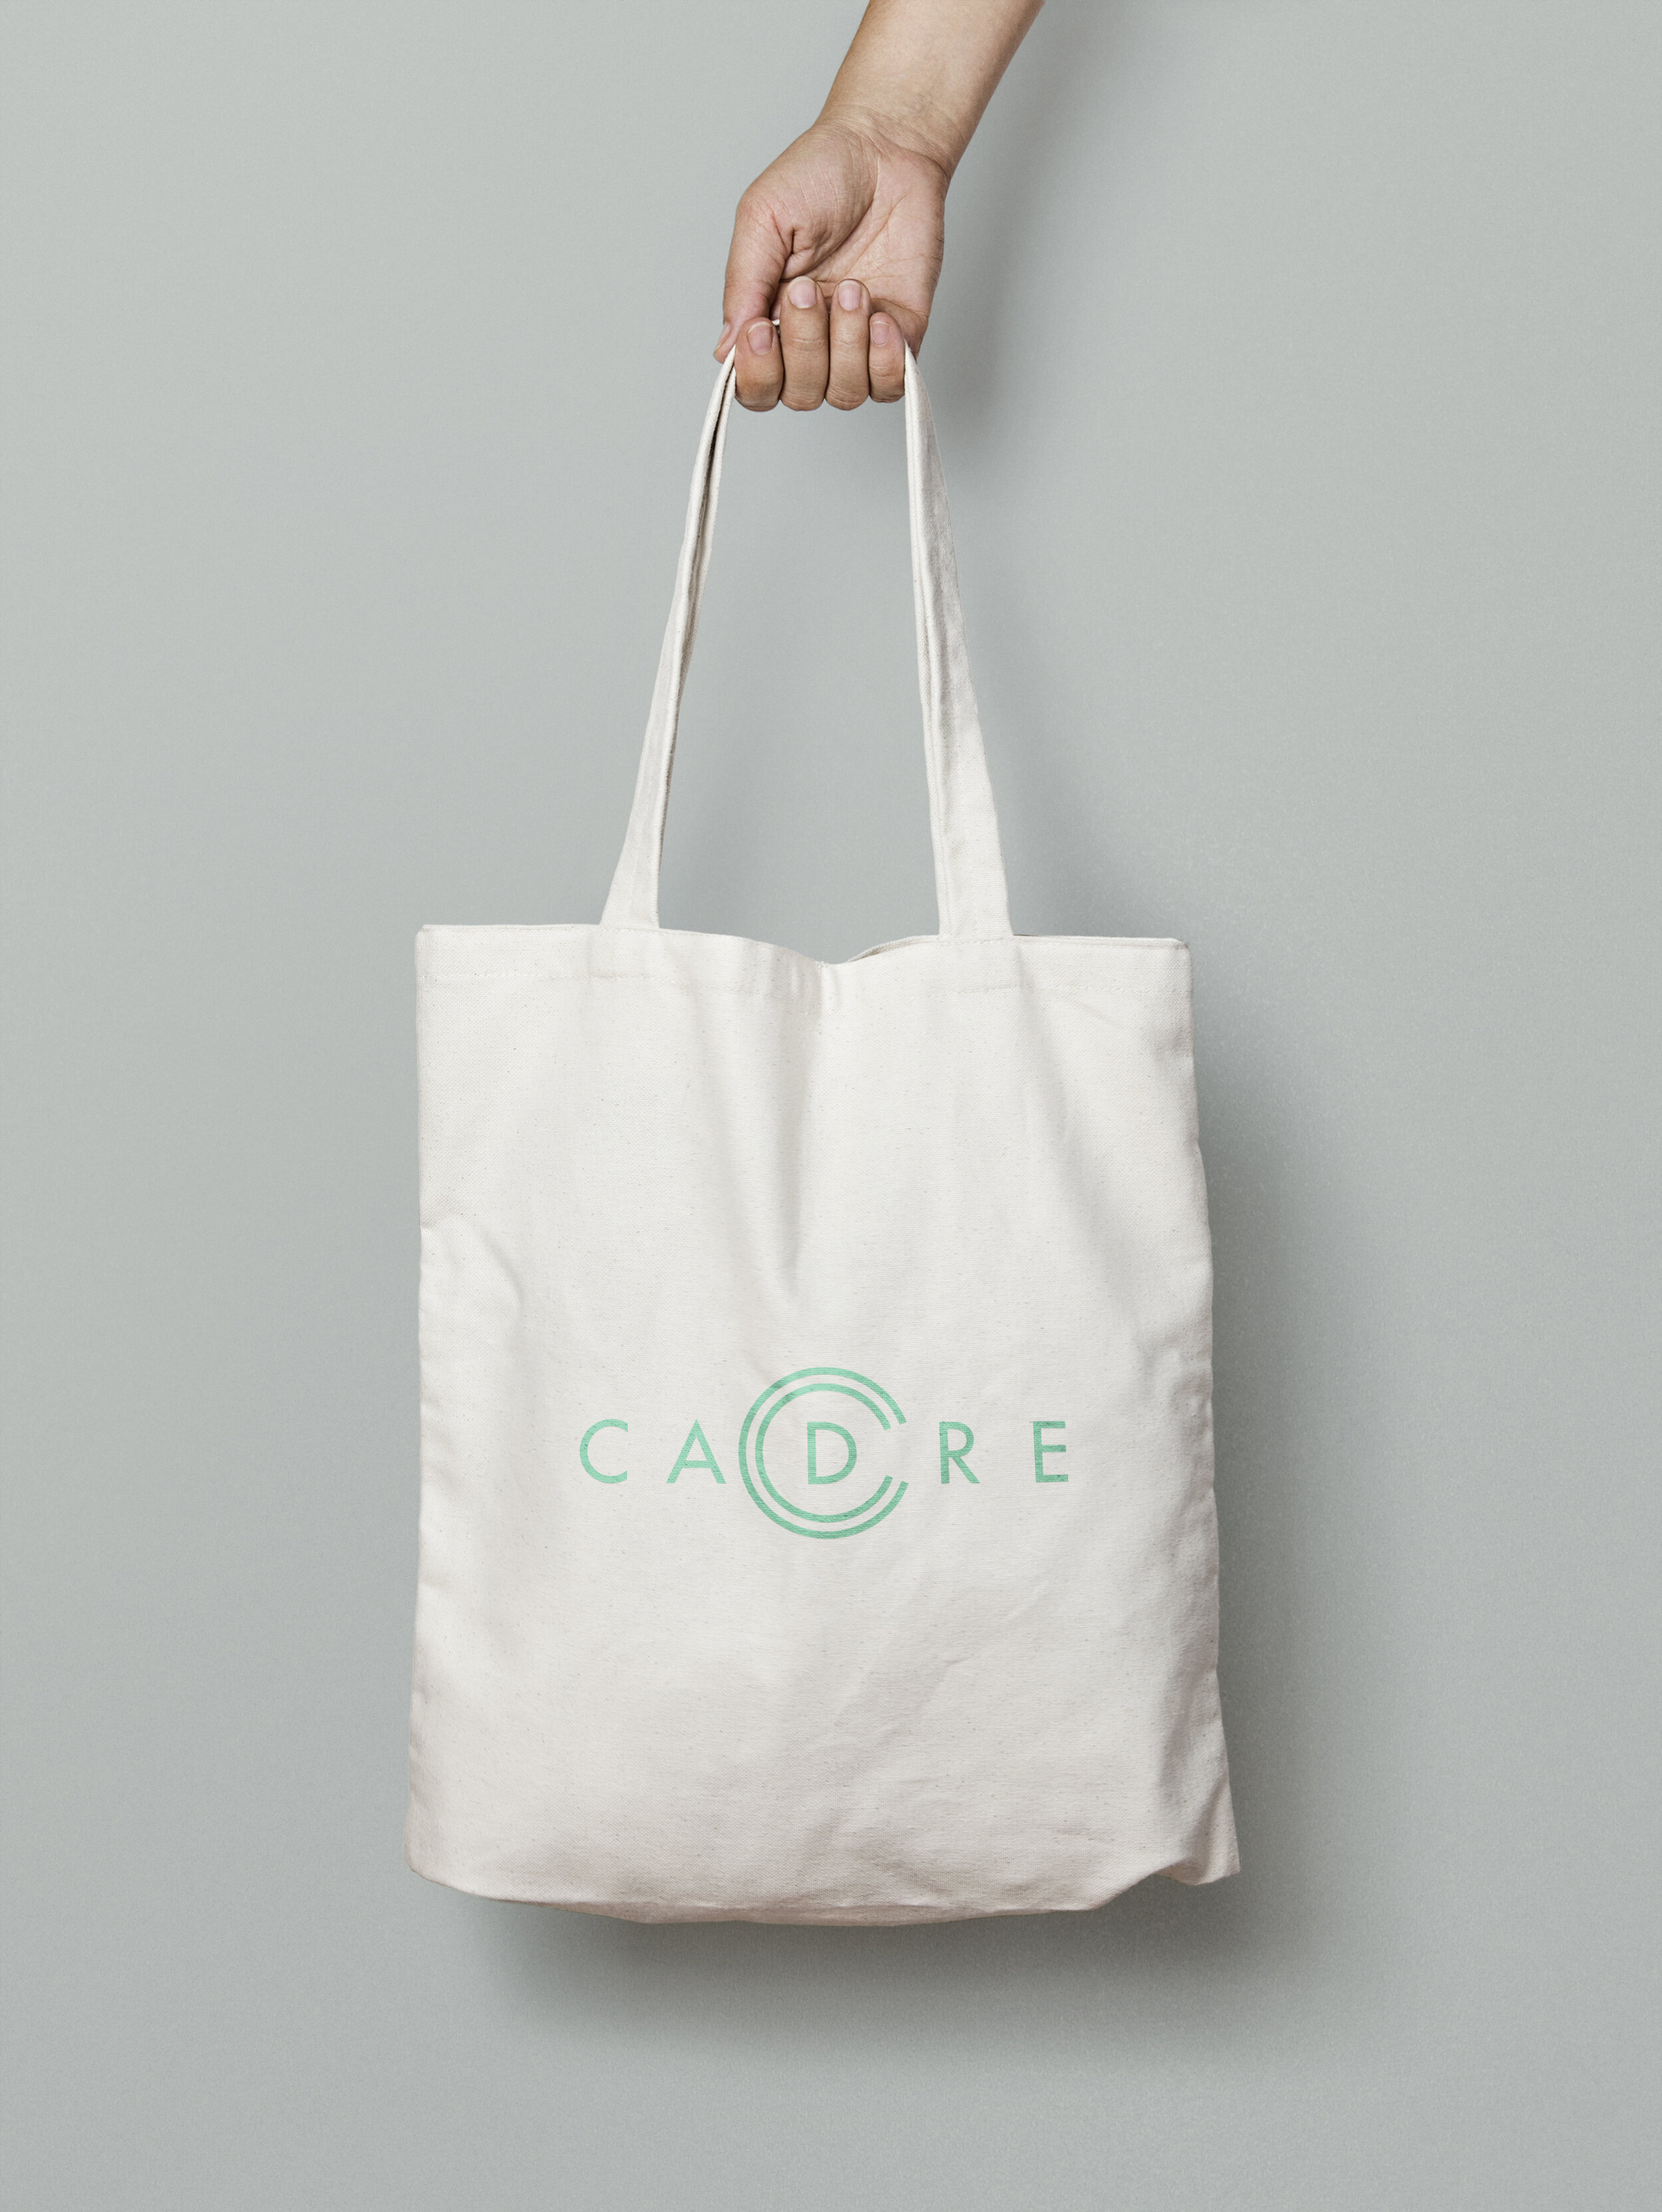  CADRE tote bag sample  Branding creative and design by Chuck Mitchell 